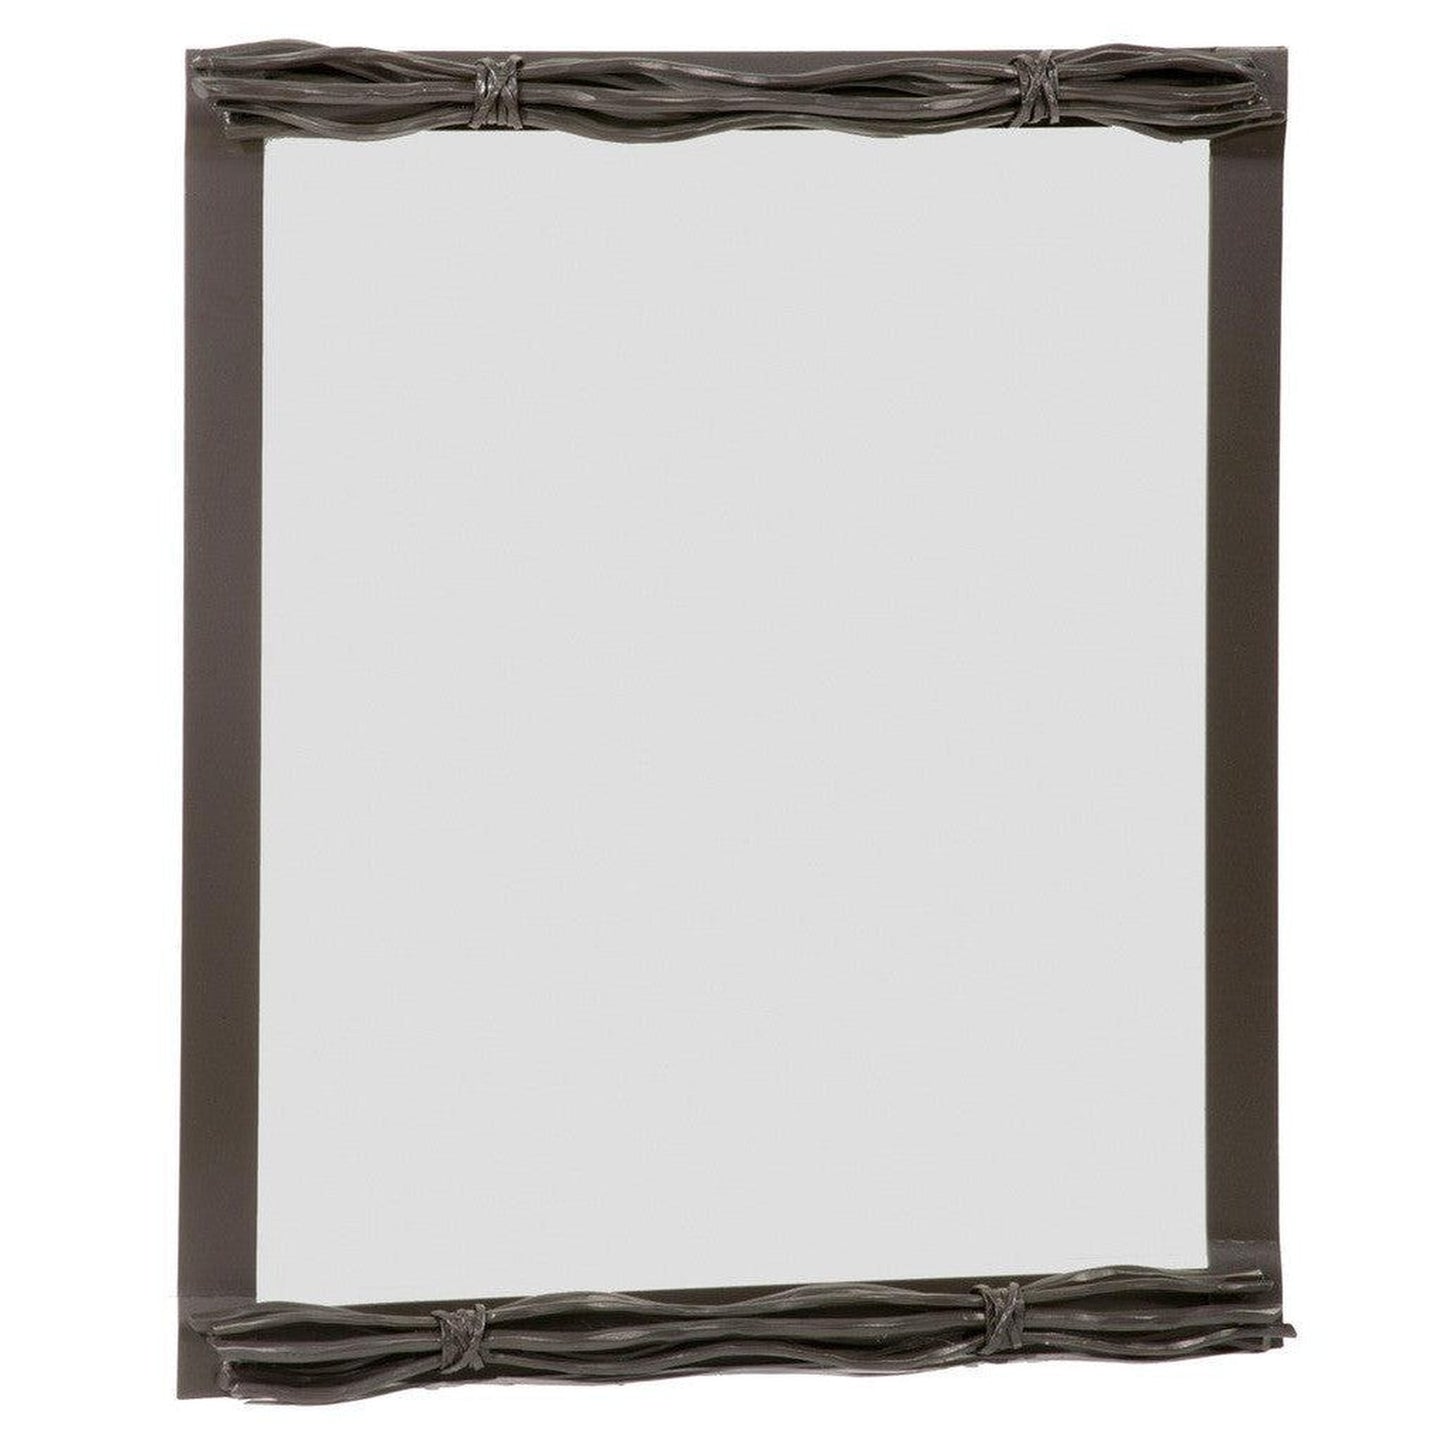 Stone County Ironworks Rush 21" x 26" Small Natural Black Iron Wall Mirror With Pewter Iron Accent